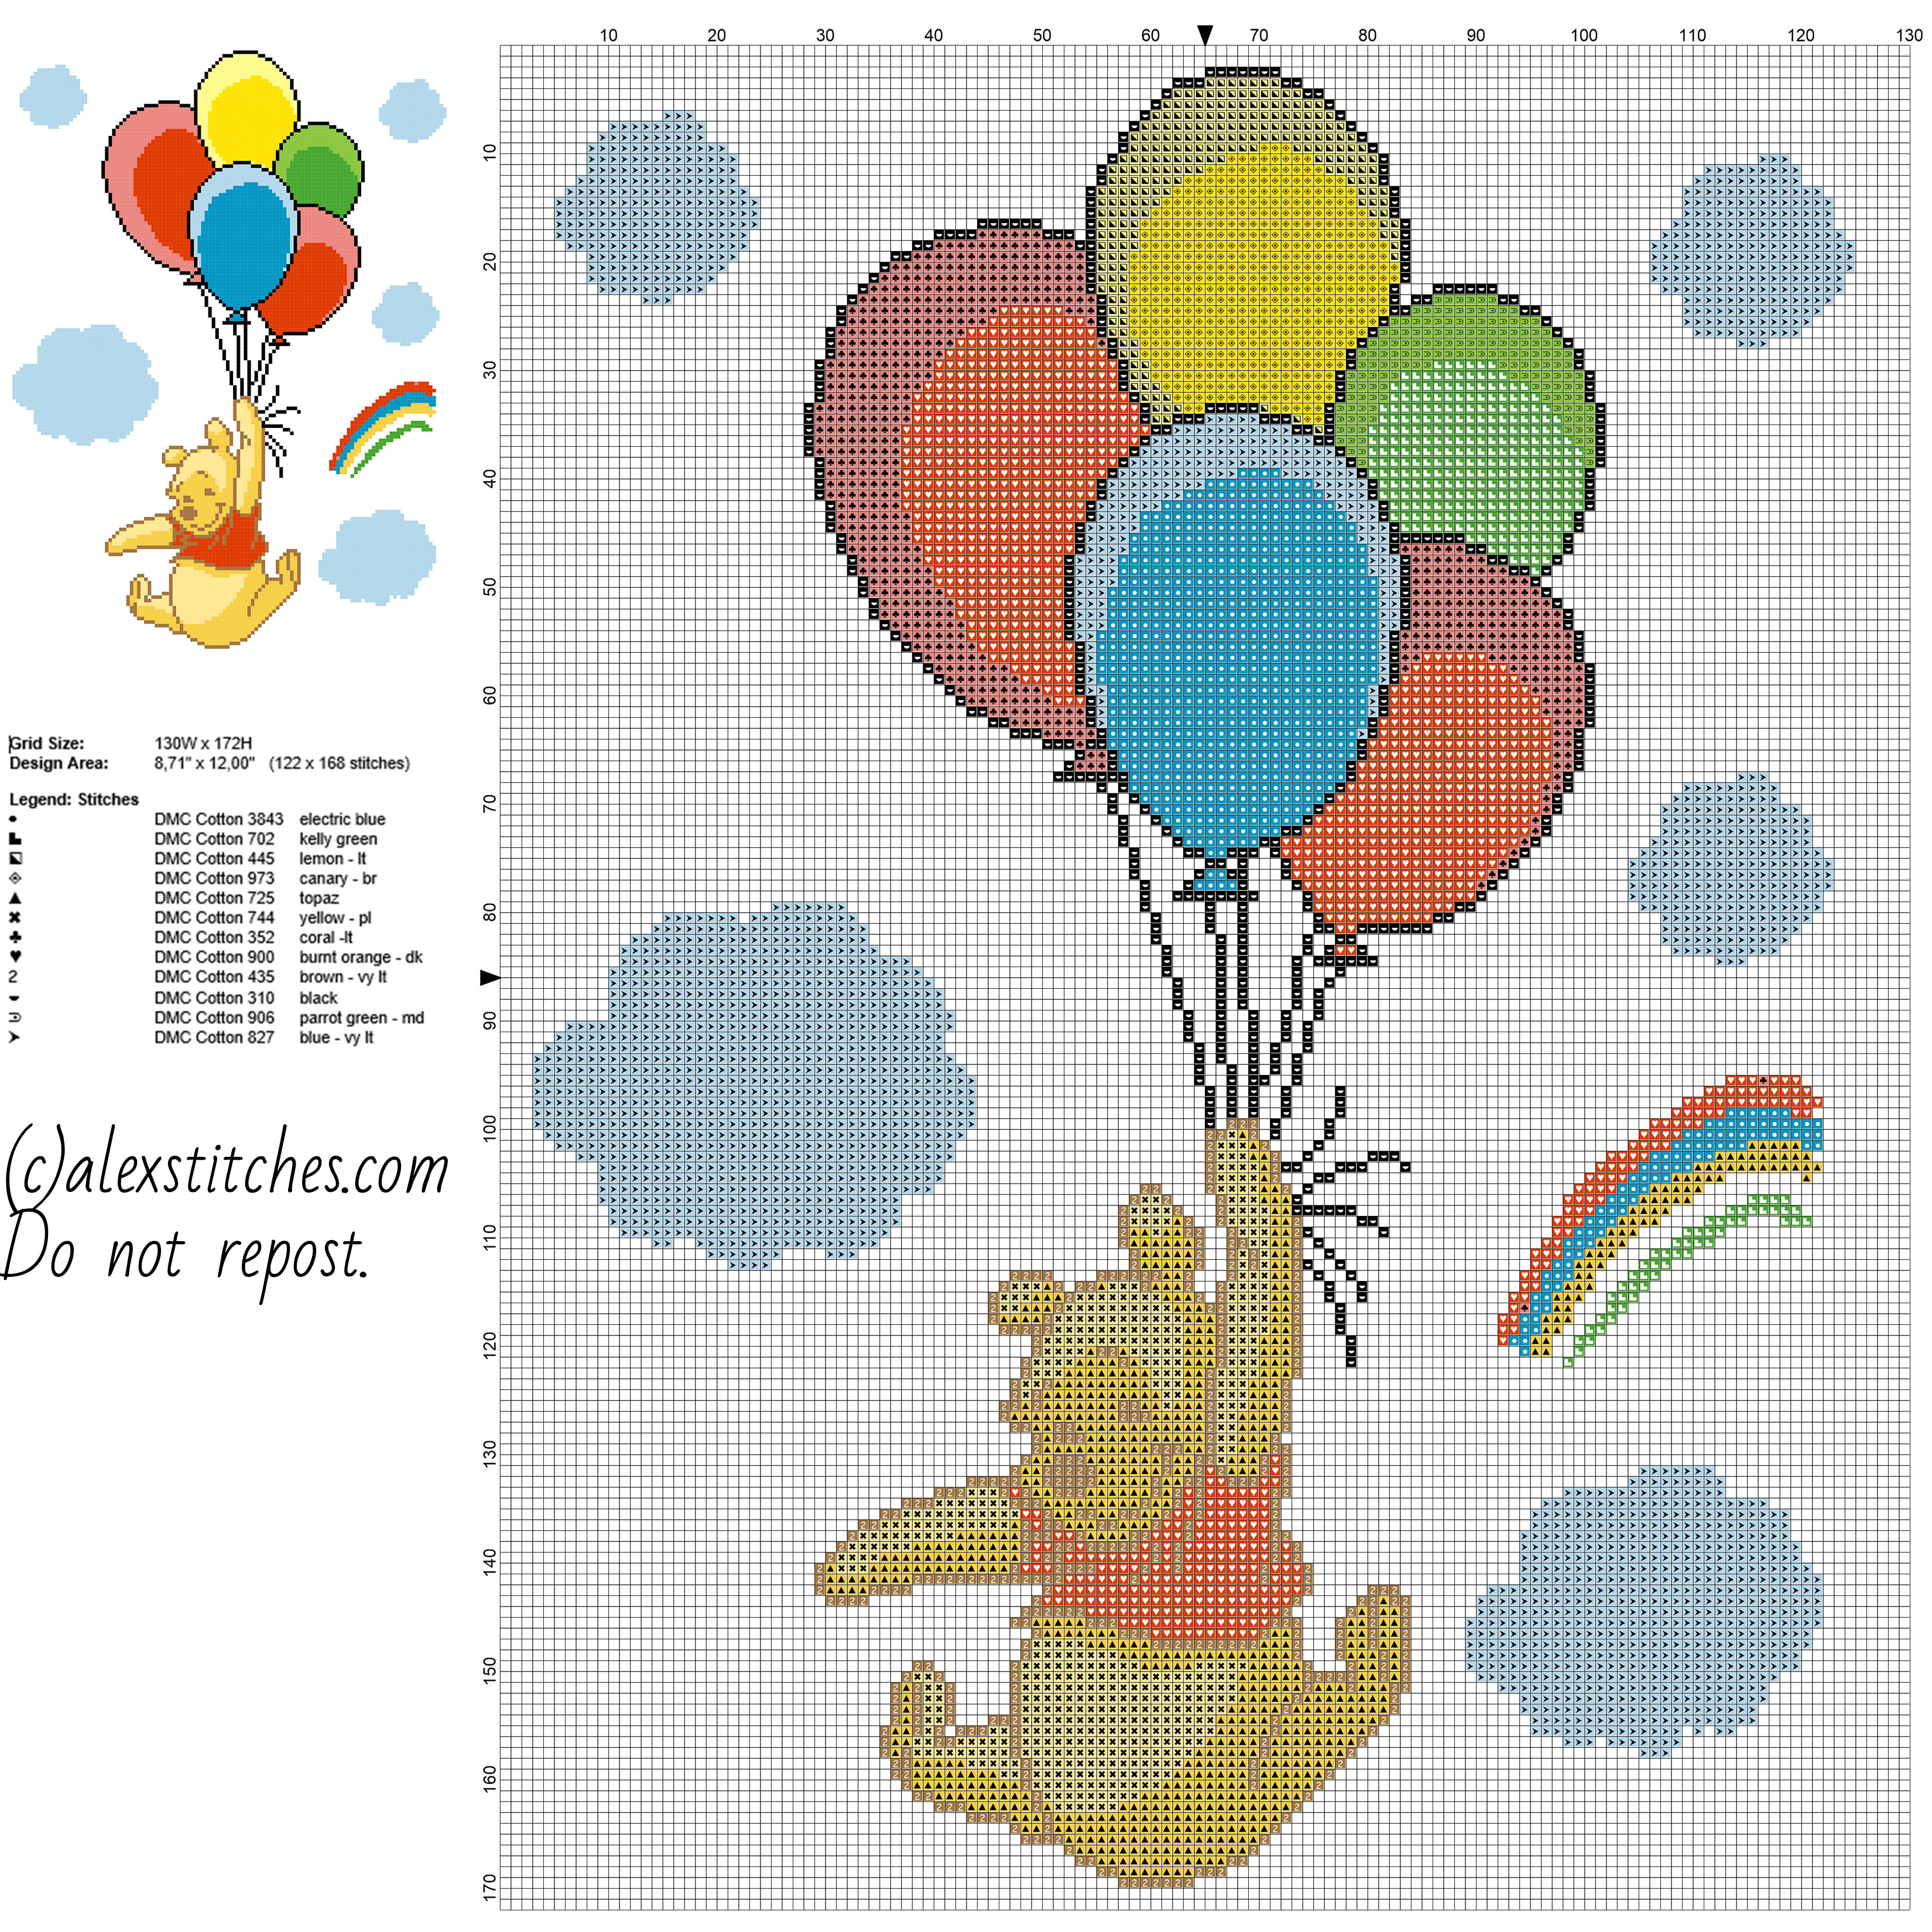 Winnie The Pooh with colored balloons free cross stitch pattern baby blanket idea 122 x 168 stitches 12 DMC threads